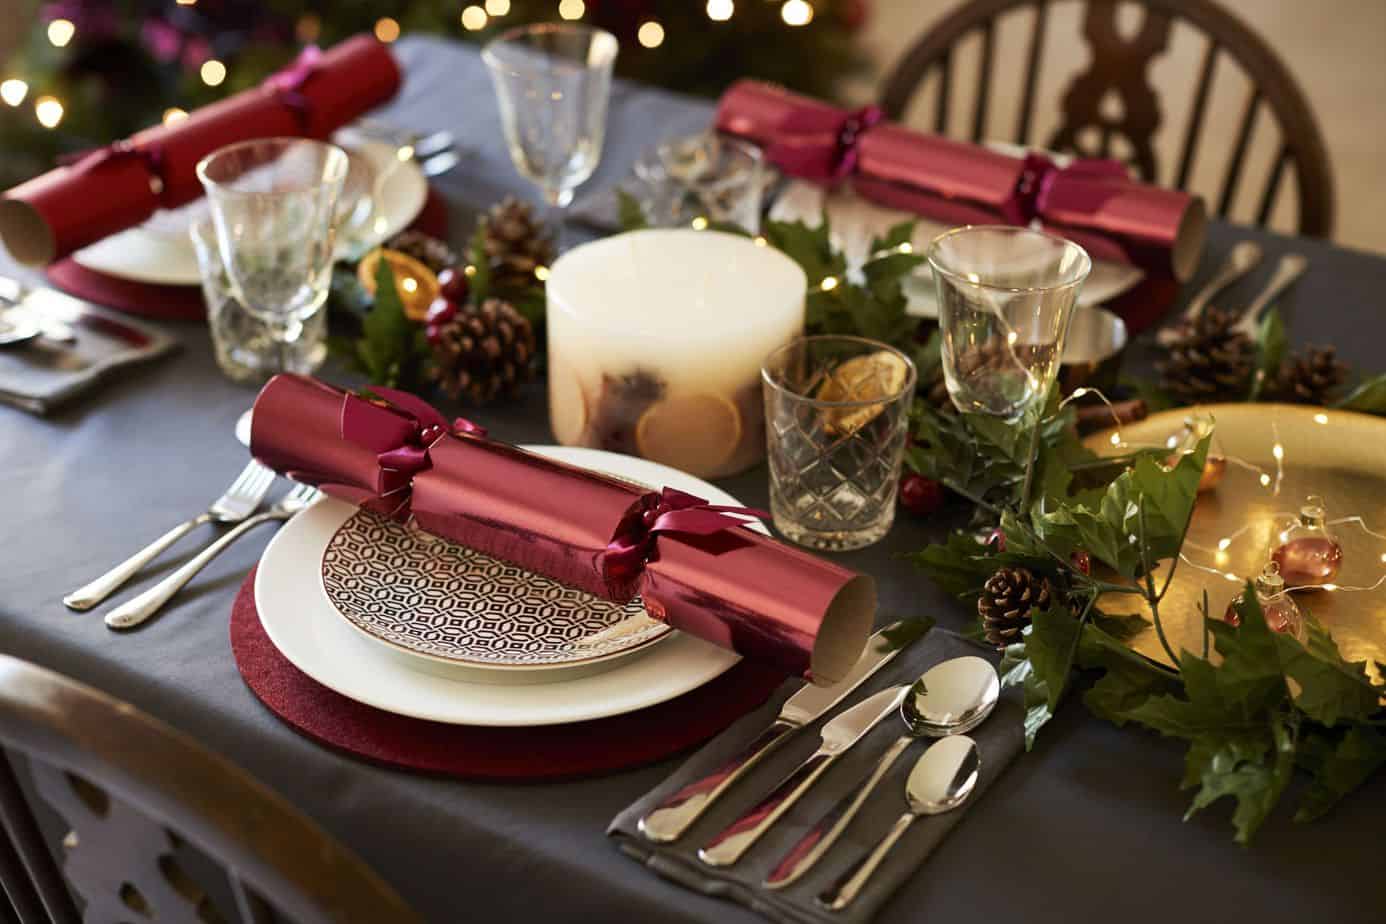  Charming table with Christmas centrepiece setting